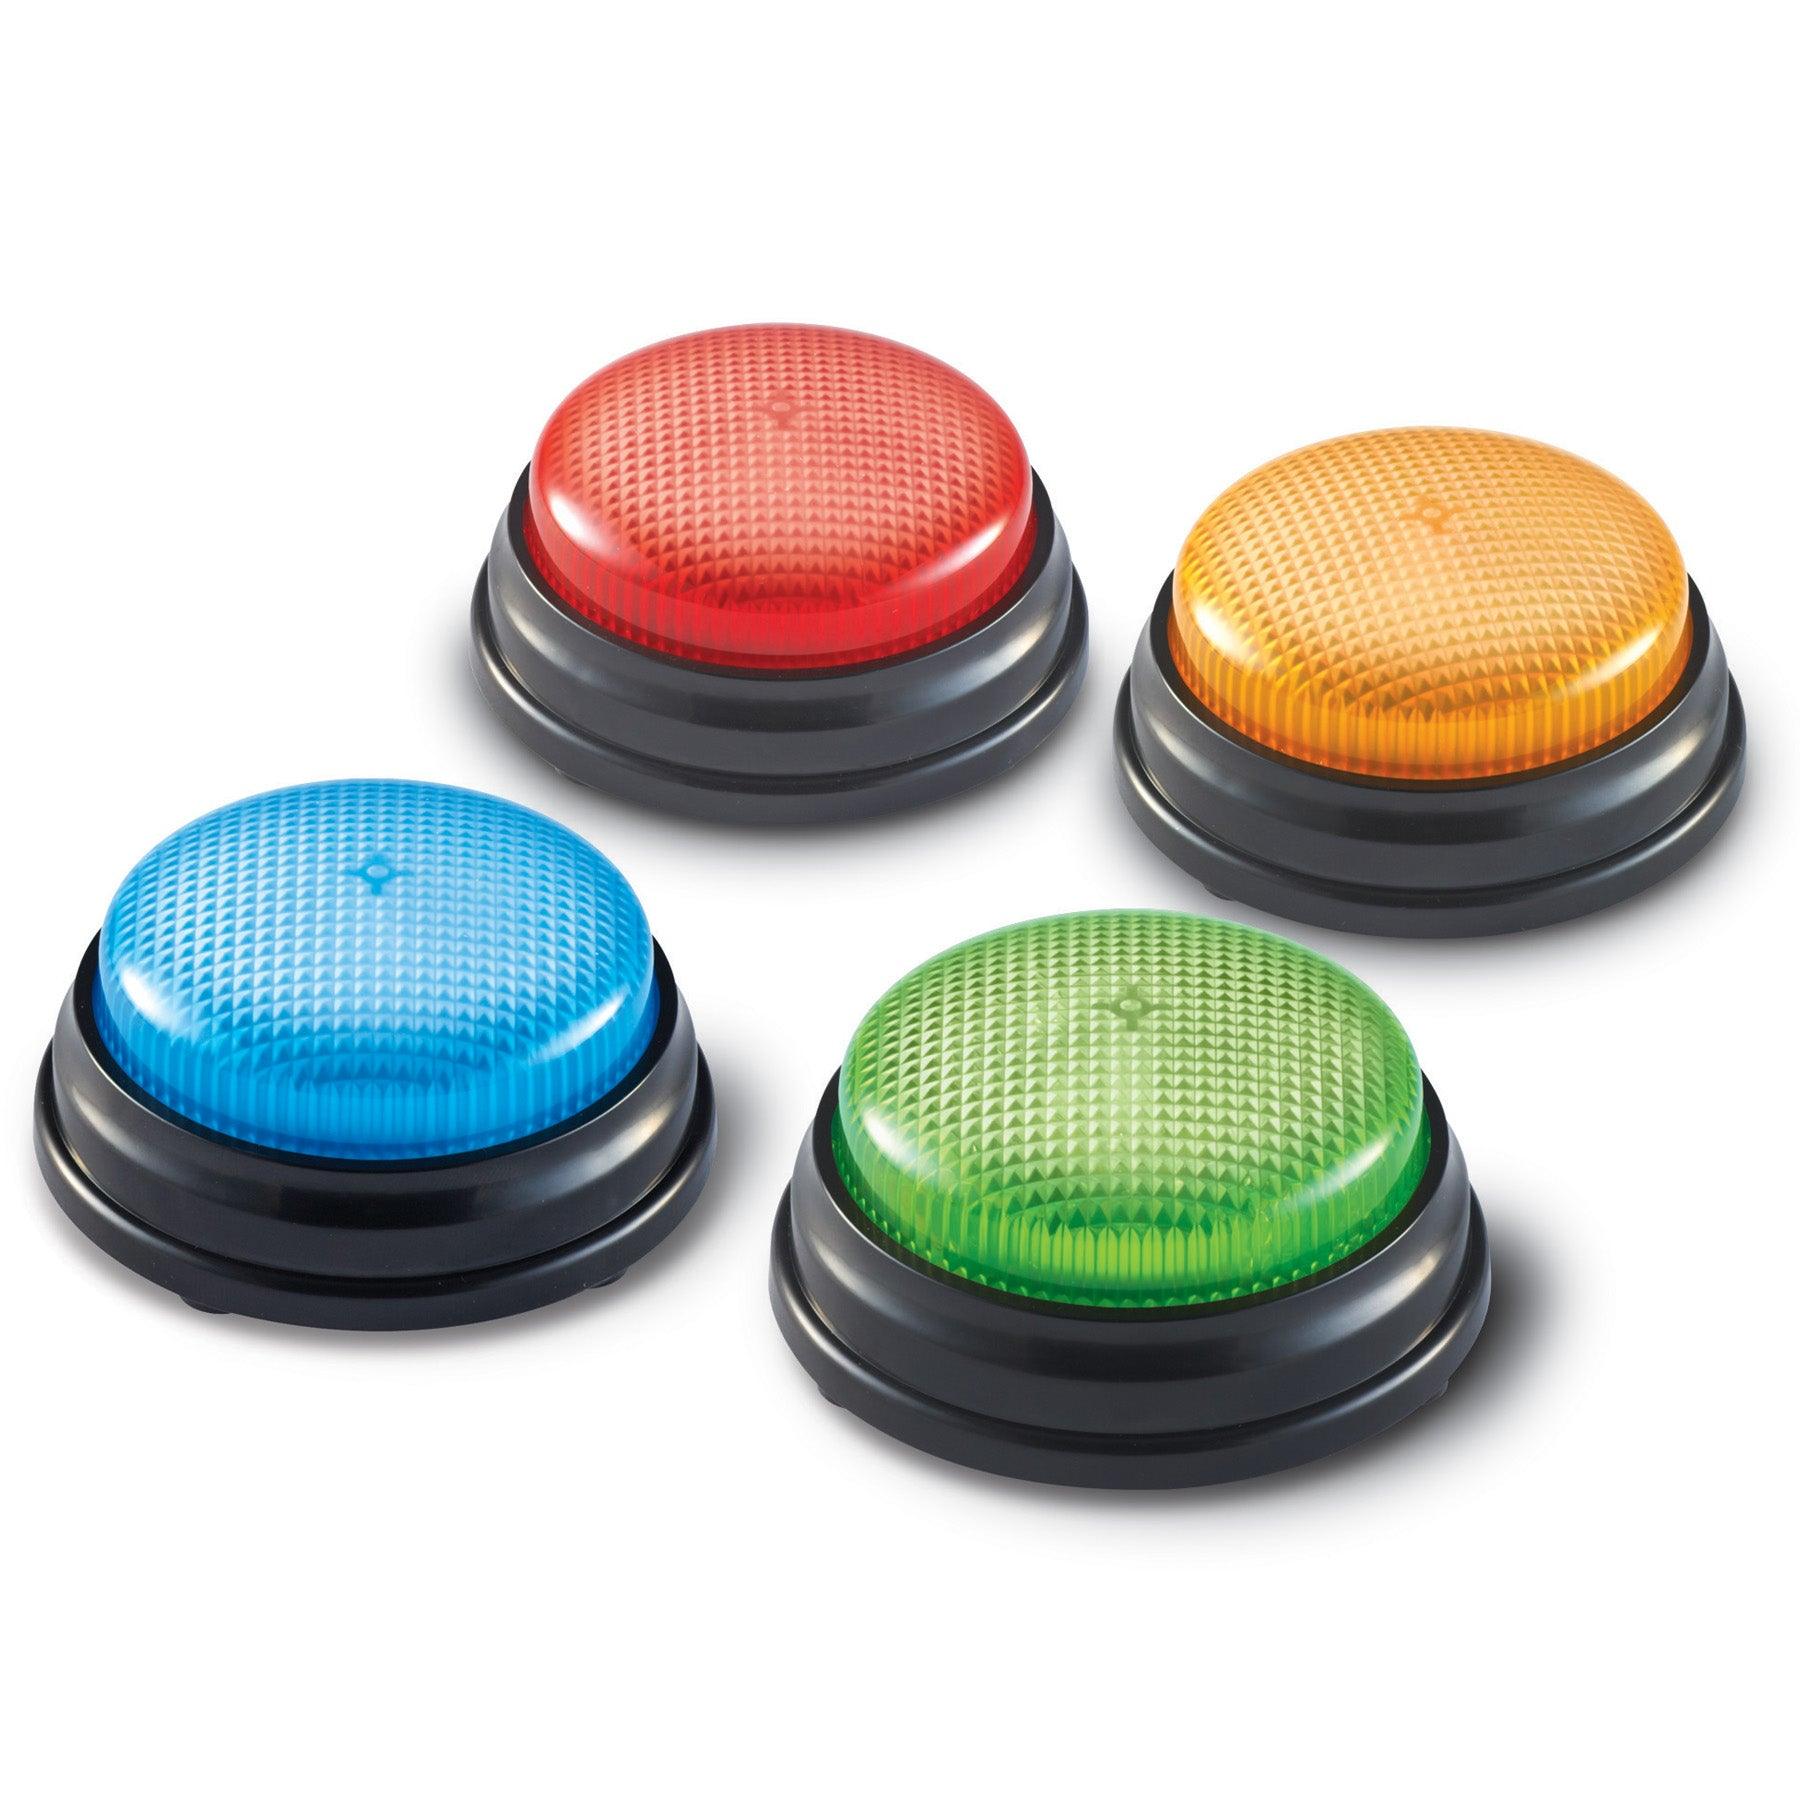 Lights and Sounds Answer Buzzers, Set of 4 - Loomini